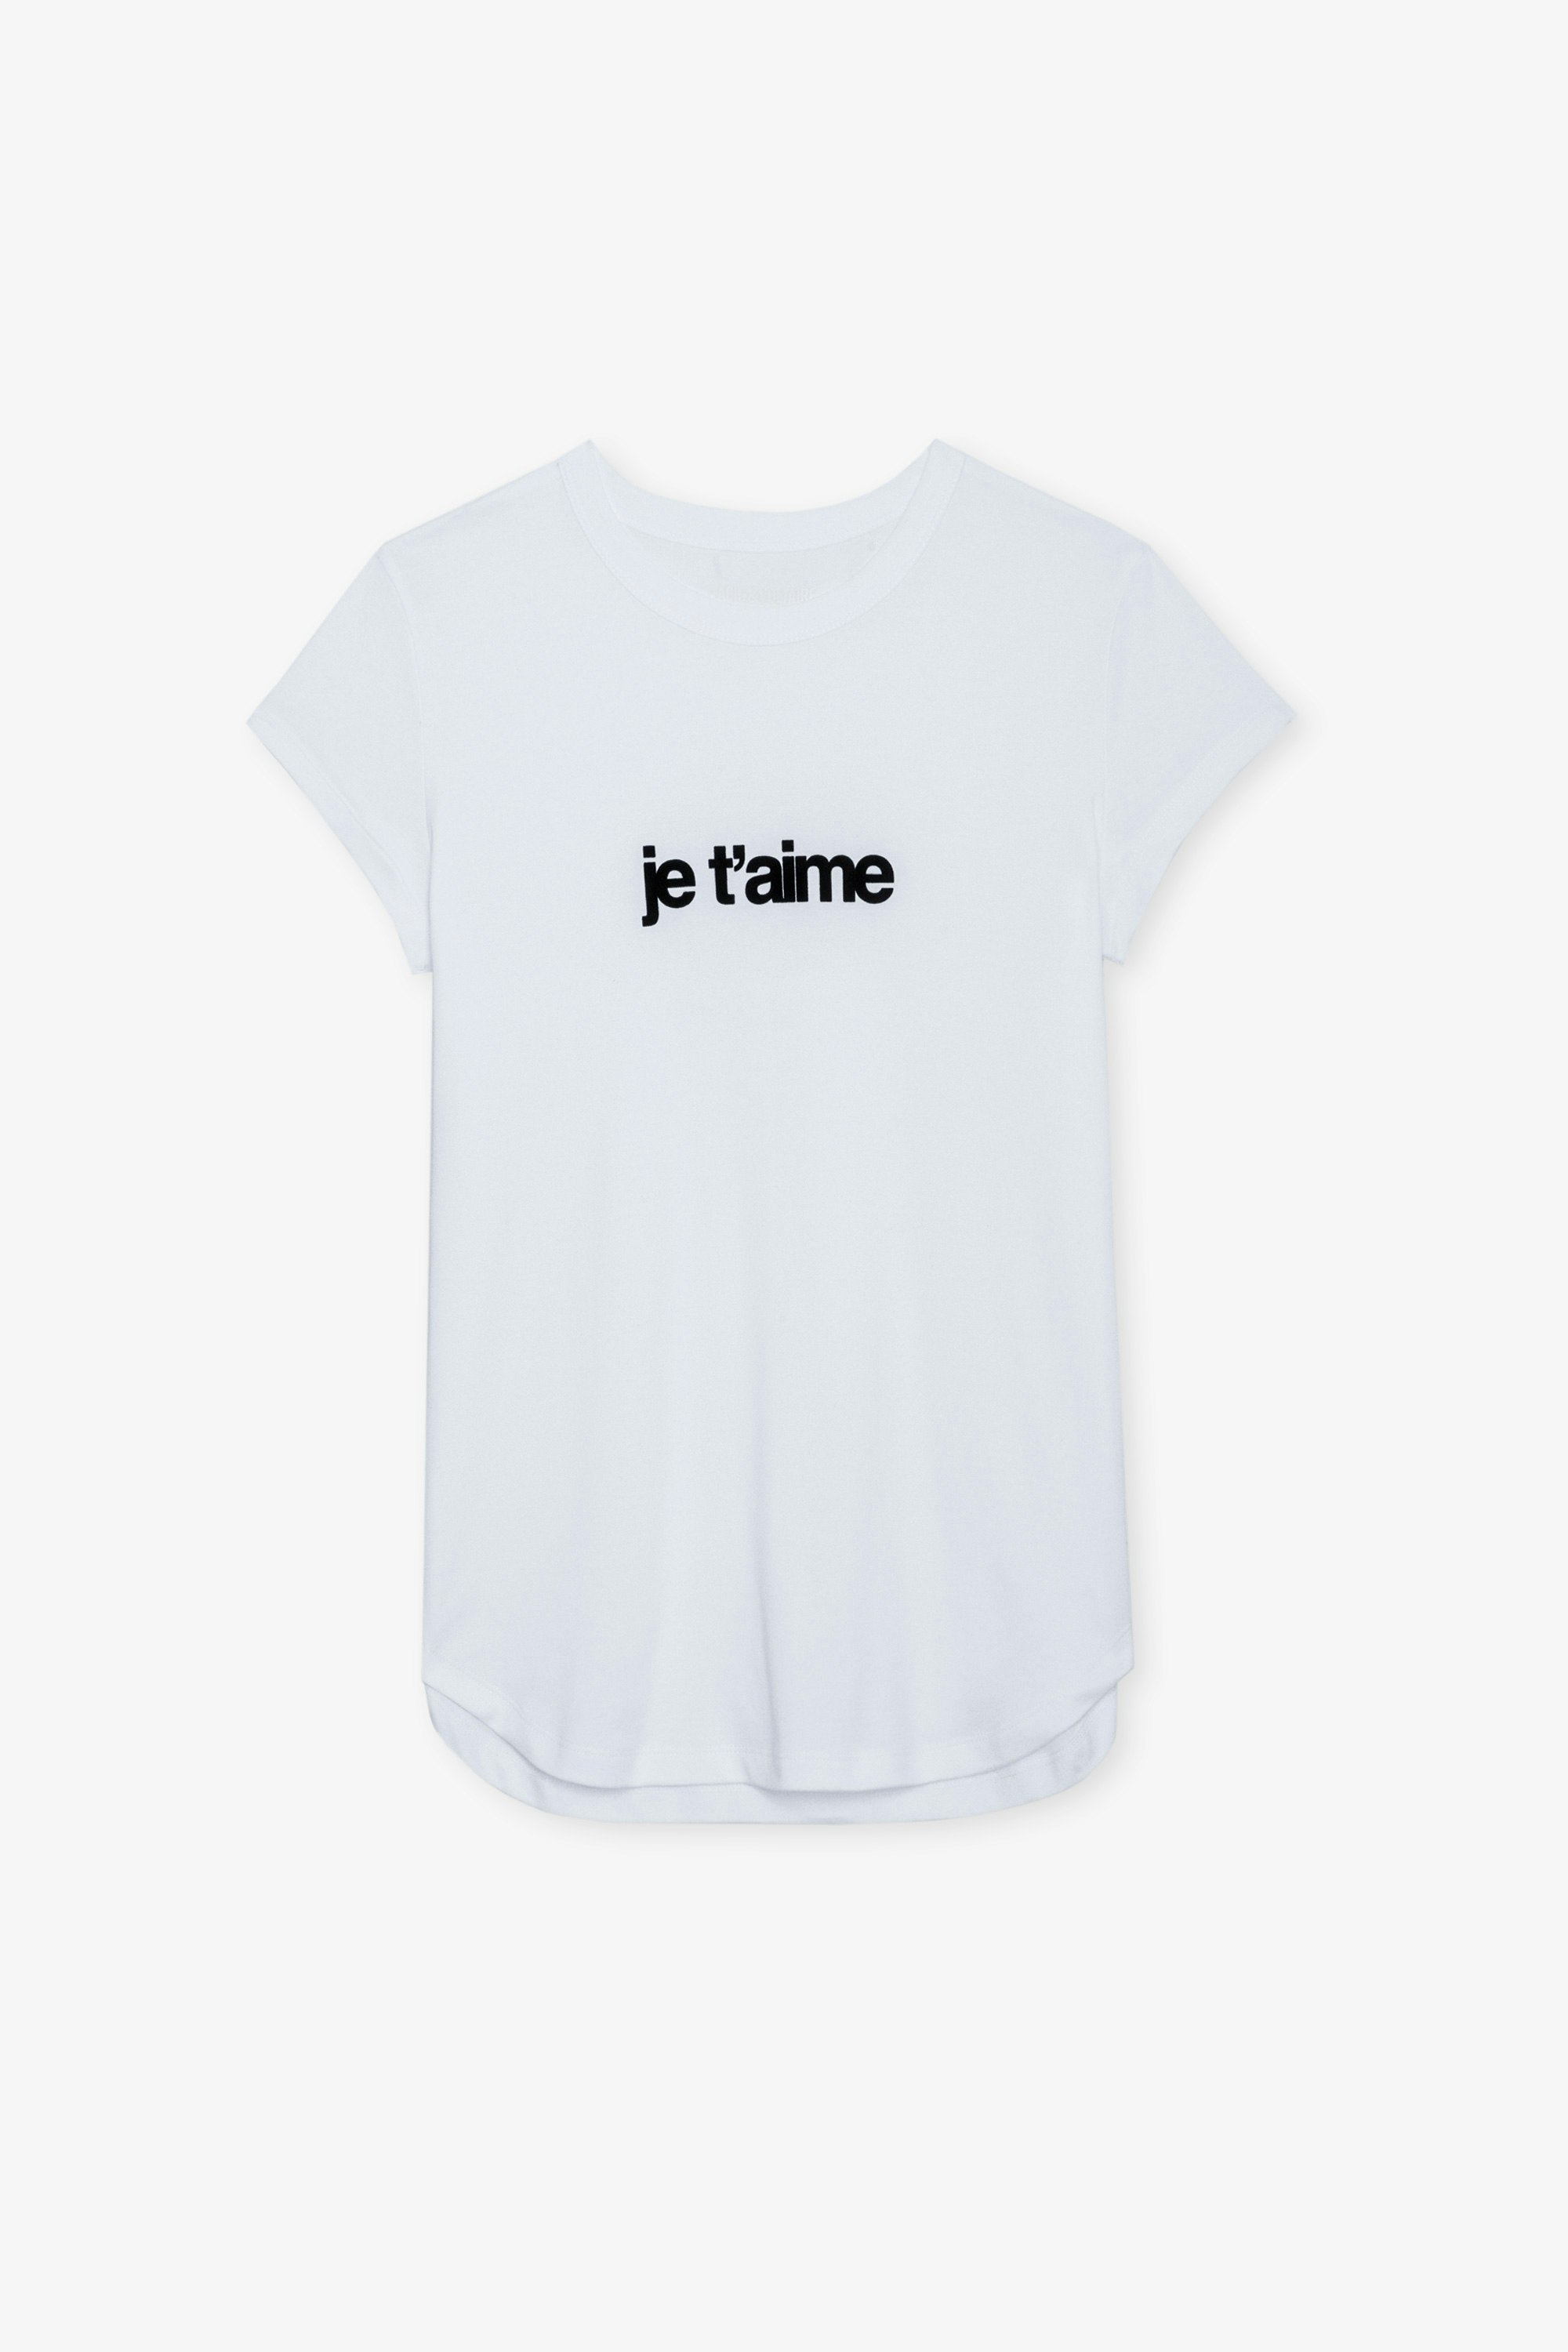 Woop Je T’aime T-shirt - White cotton round-neck T-shirt with short sleeves and flocked slogan.